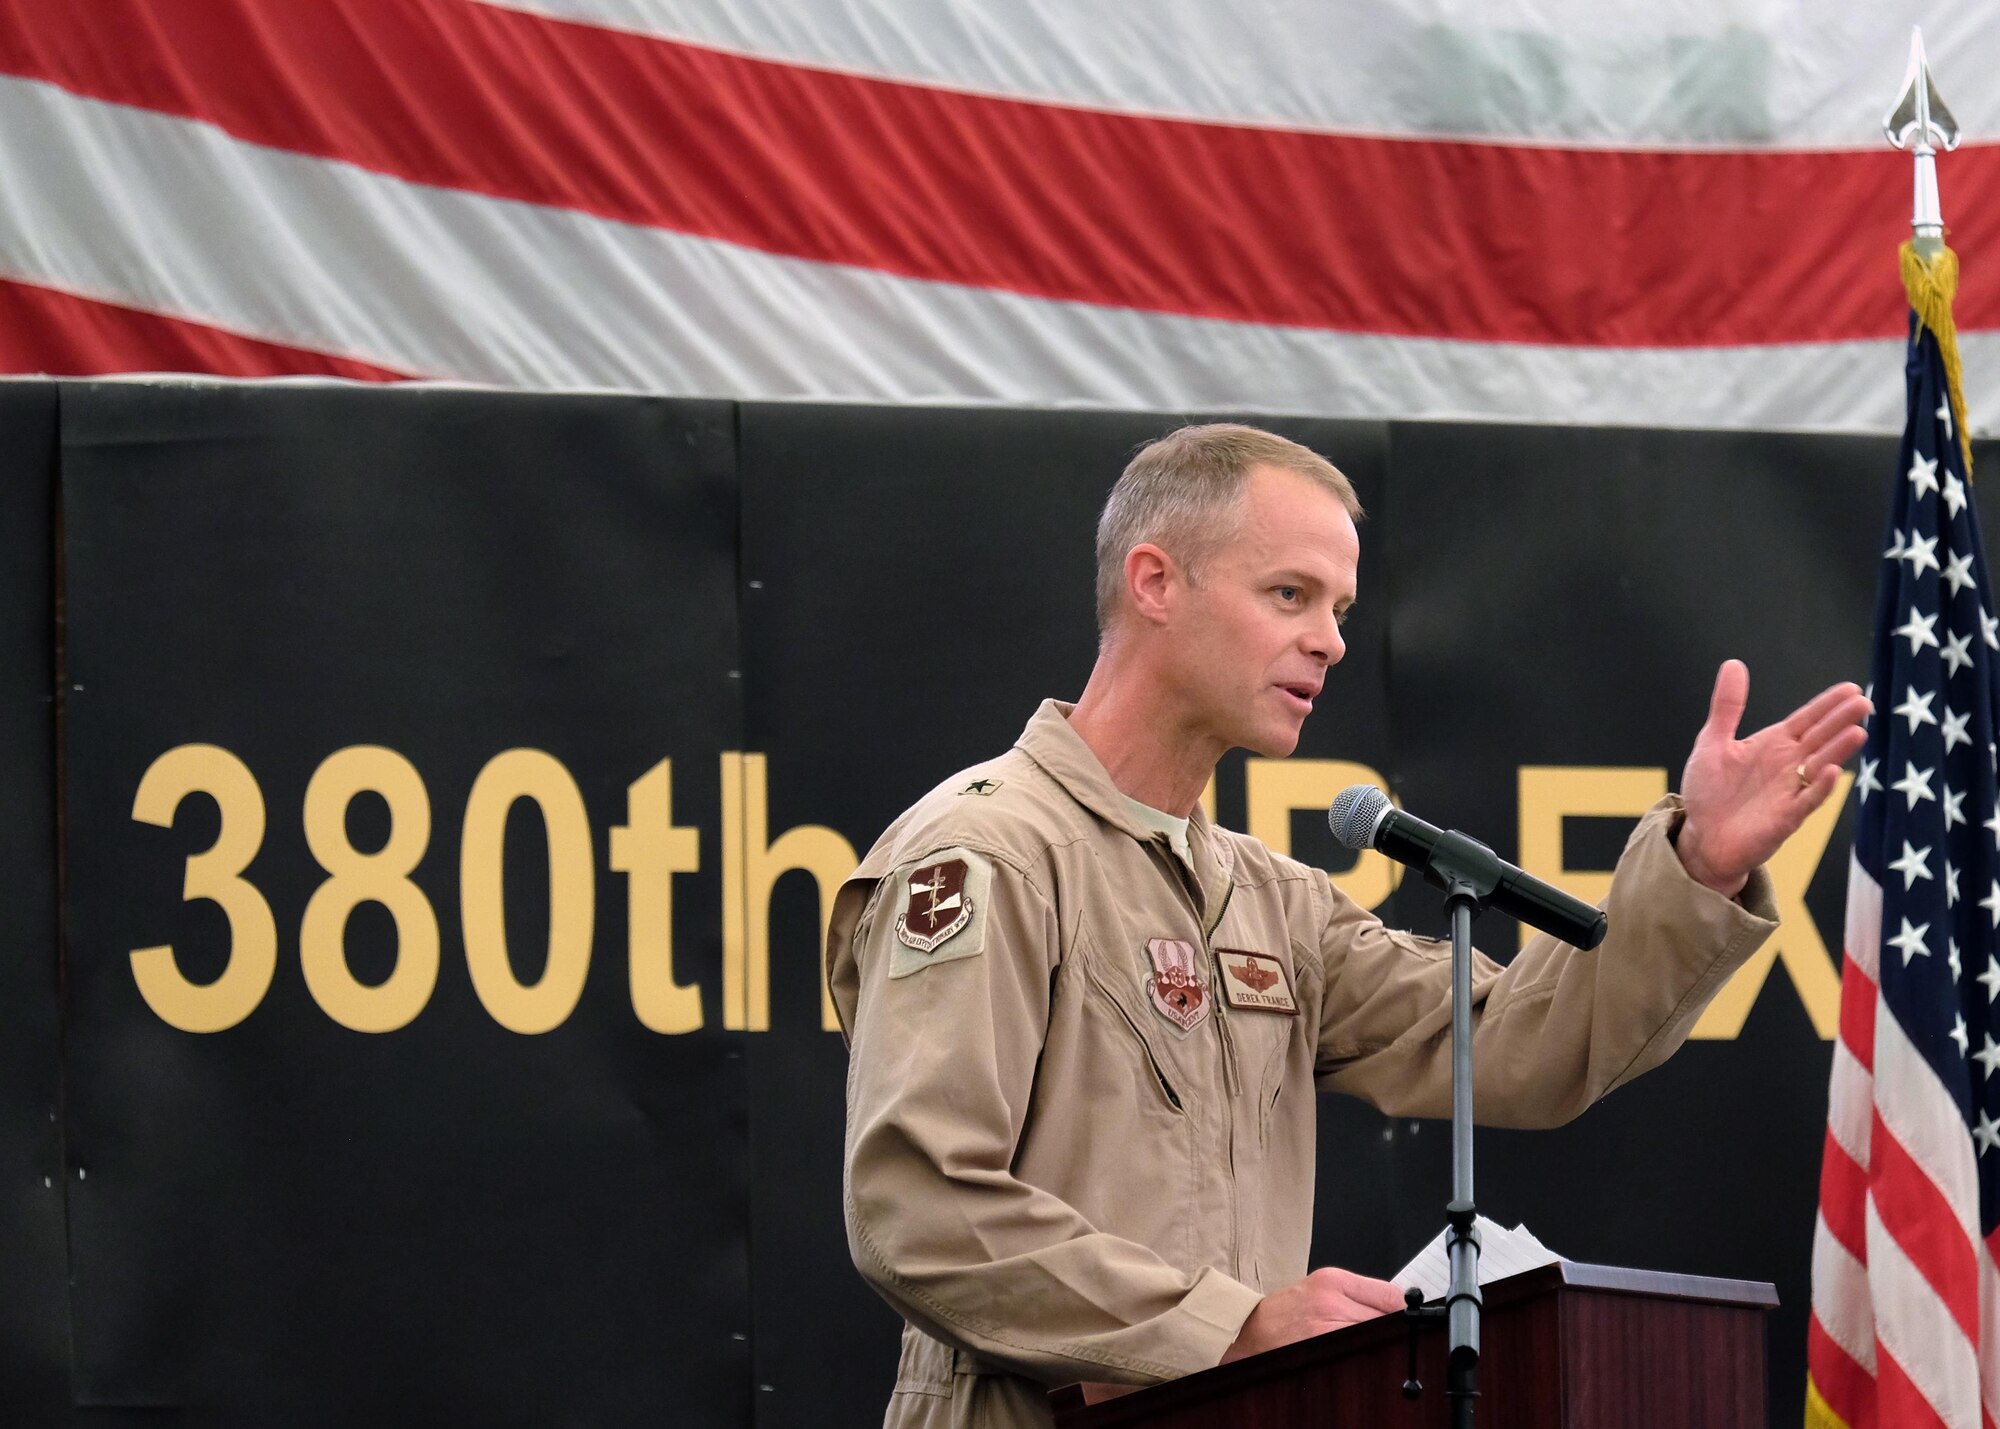 Brig. Gen. Derek C. France, incoming 380th Air Expeditionary commander, speaks to Airmen during a change of command ceremony July 1, 2017, at an undisclosed location in southwest Asia. France comes to the unit after serving as the senior executive officer to the vice chief of staff of the Air Force, Gen. Stephen W. "Seve" Wilson, at the Pentagon, Washington, District of Columbia. (U.S. Air Force photo by Senior Airman Preston Webb)